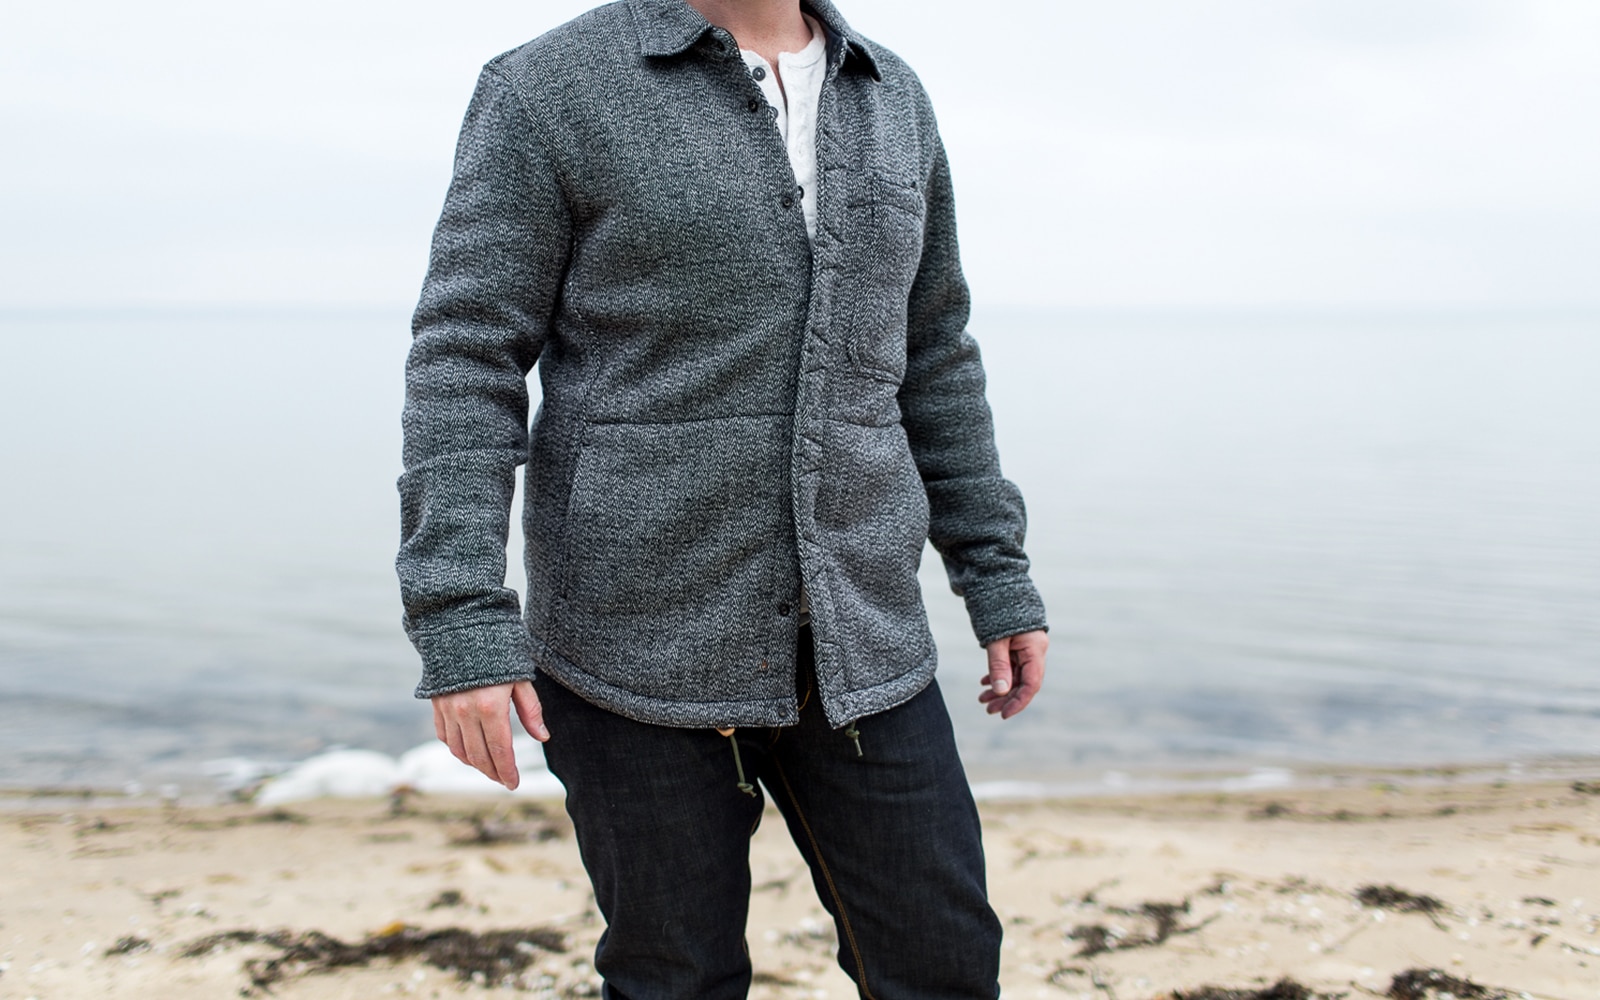 Fall Fashion and layering with Huckberry. See all of the post and ideas on The Fresh Exchange today.